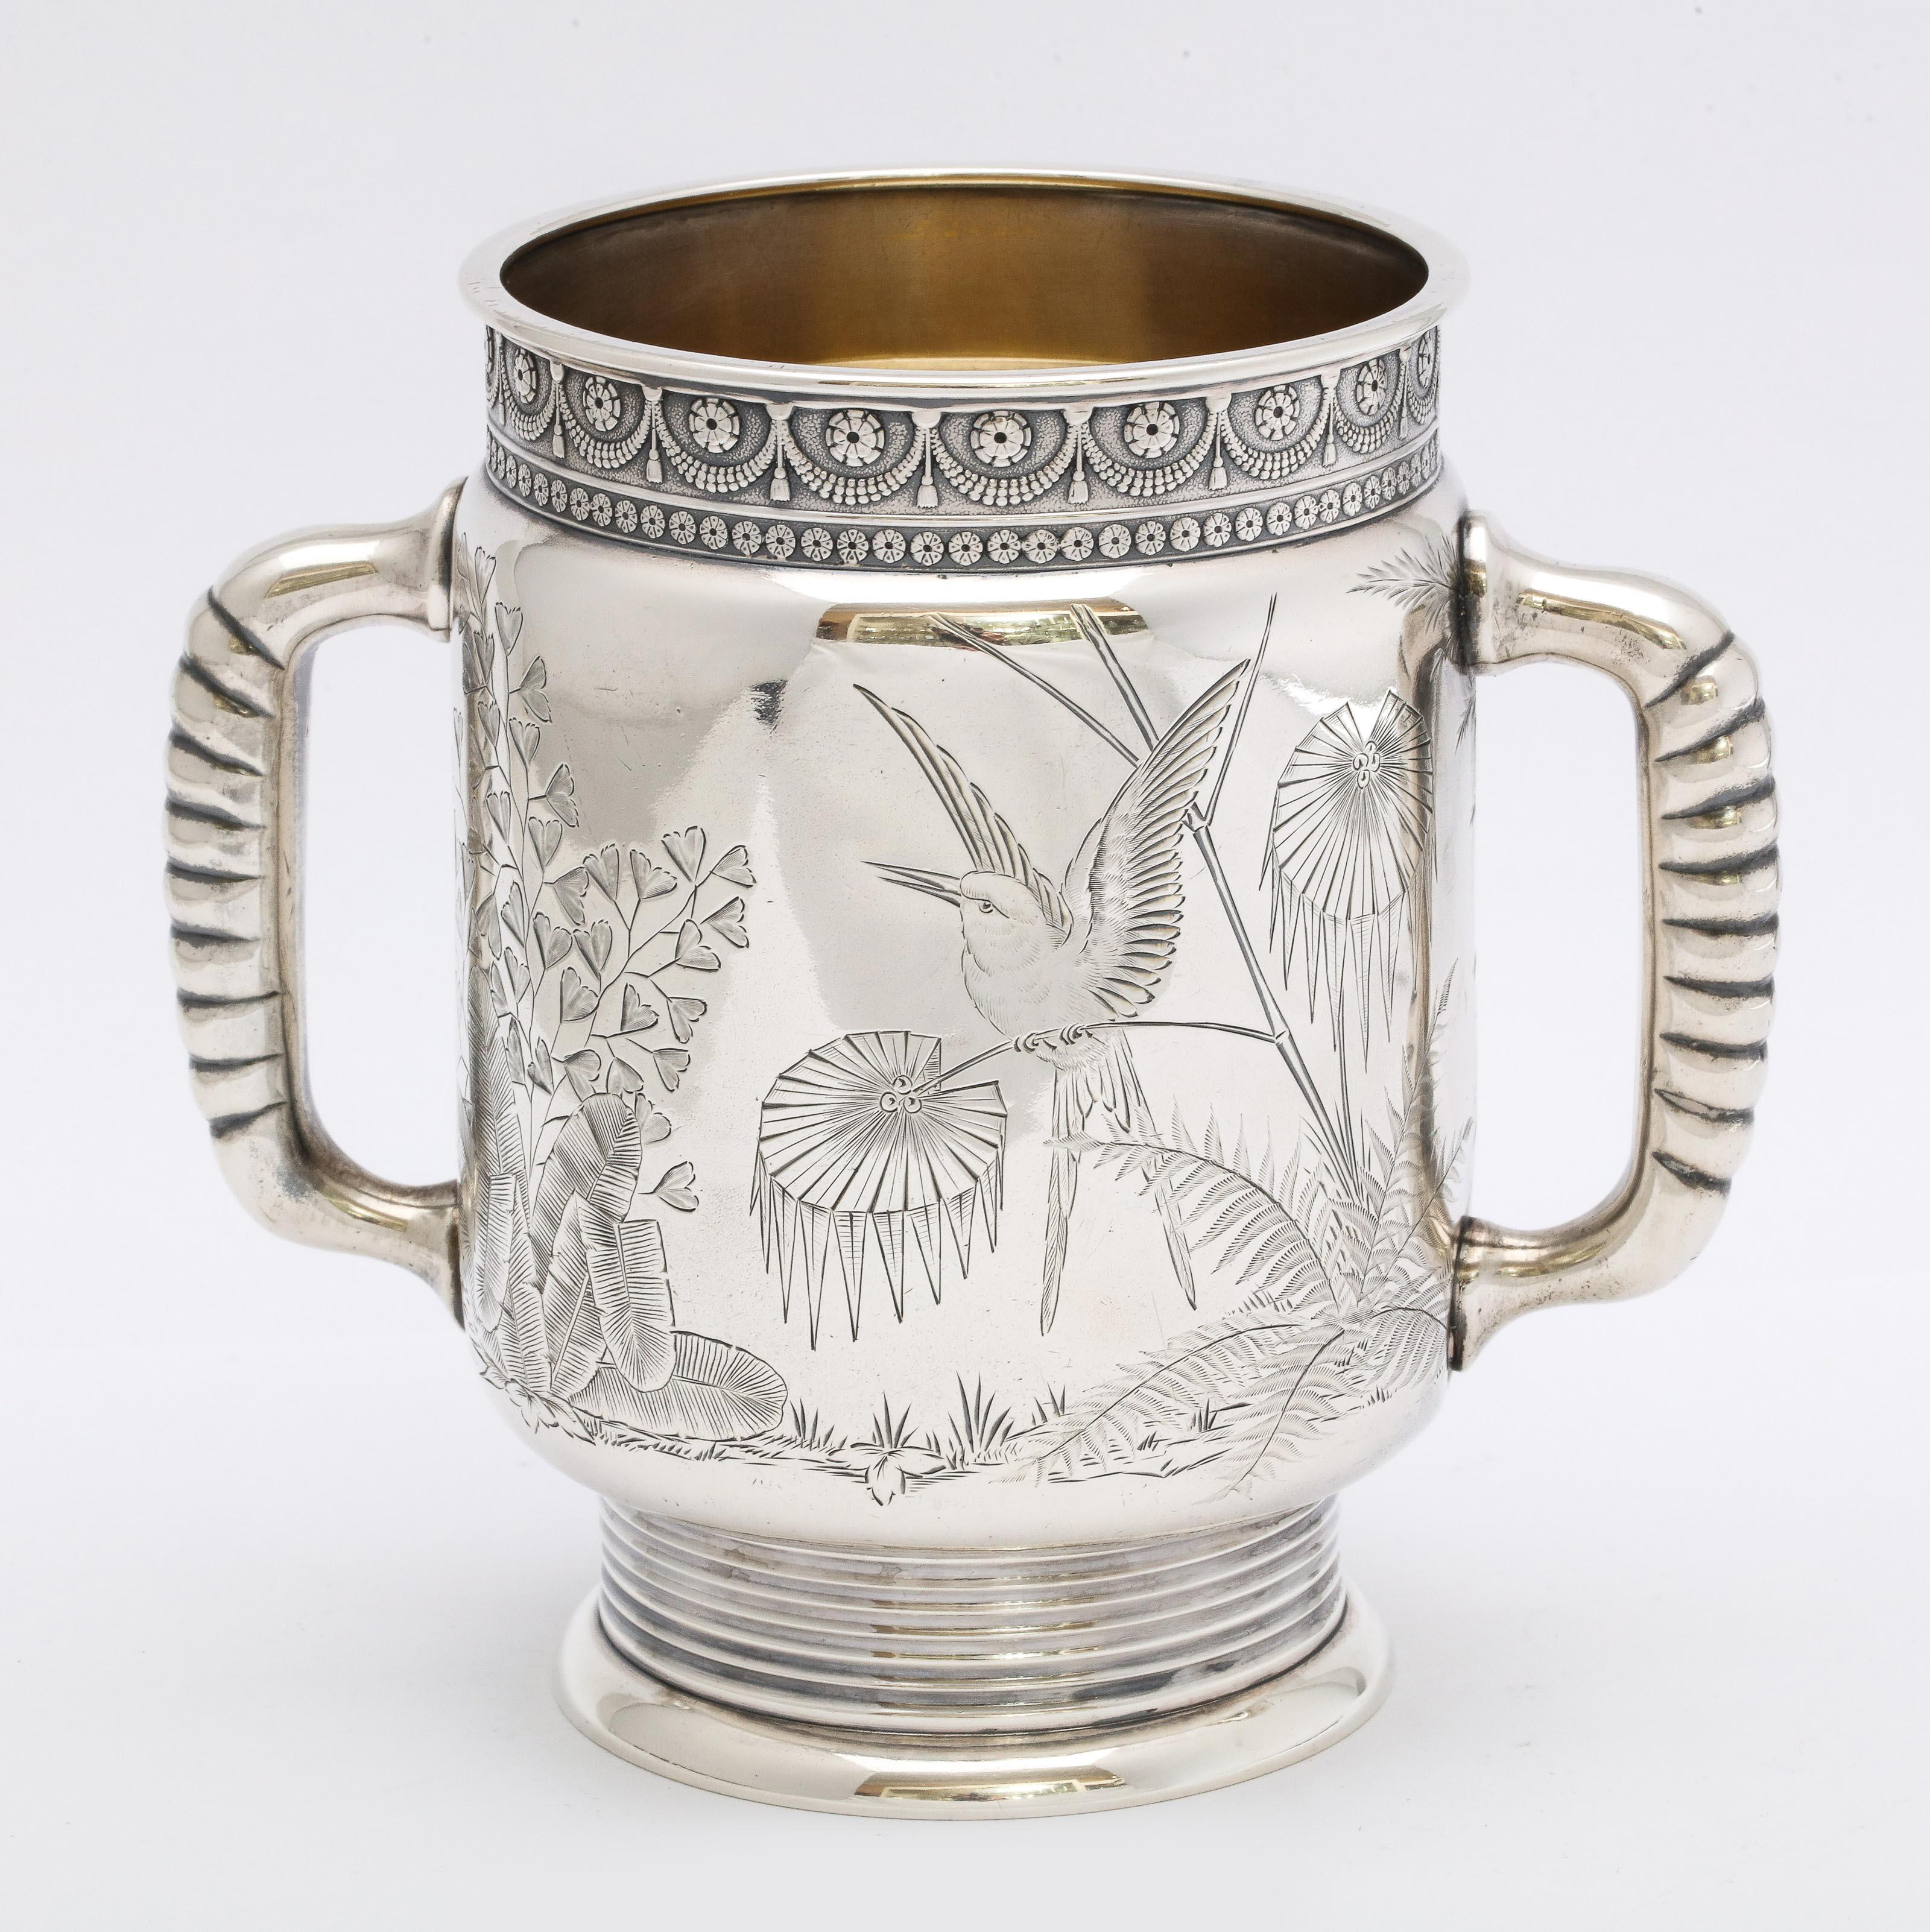 Aesthetic Movement, sterling silver, two-handled mug, Gorham Manufacturing Co., Providence, Rhode Island, year hallmarked for 1878. Lovely etched designs. One side has an etched butterfly flitting among ferns; the opposite side of the mug has an